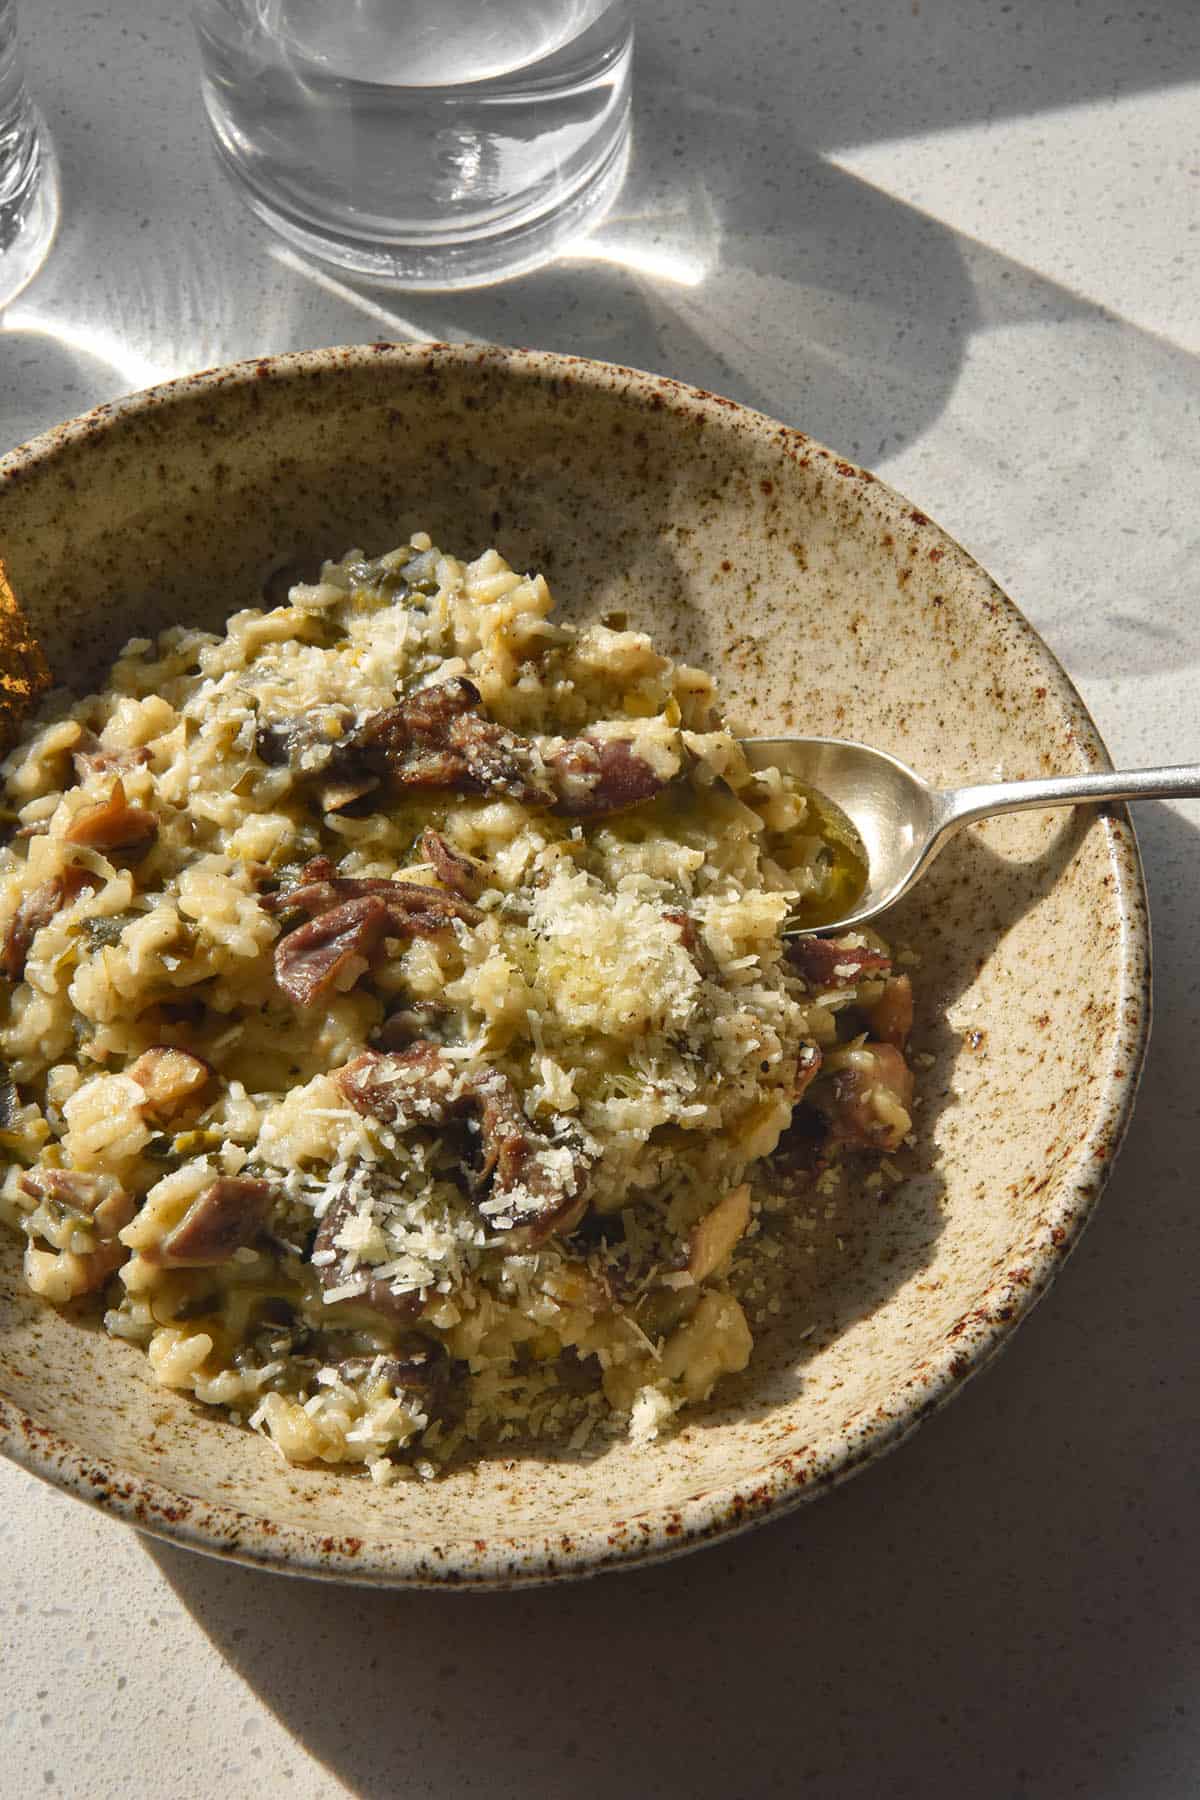 A close up side on view of a beige speckled ceramic bowl filled with low FODMAP mushroom risotto. The risotto is topped with grated parmesan and a spoon sits in the bowl extending to the right side of the image.